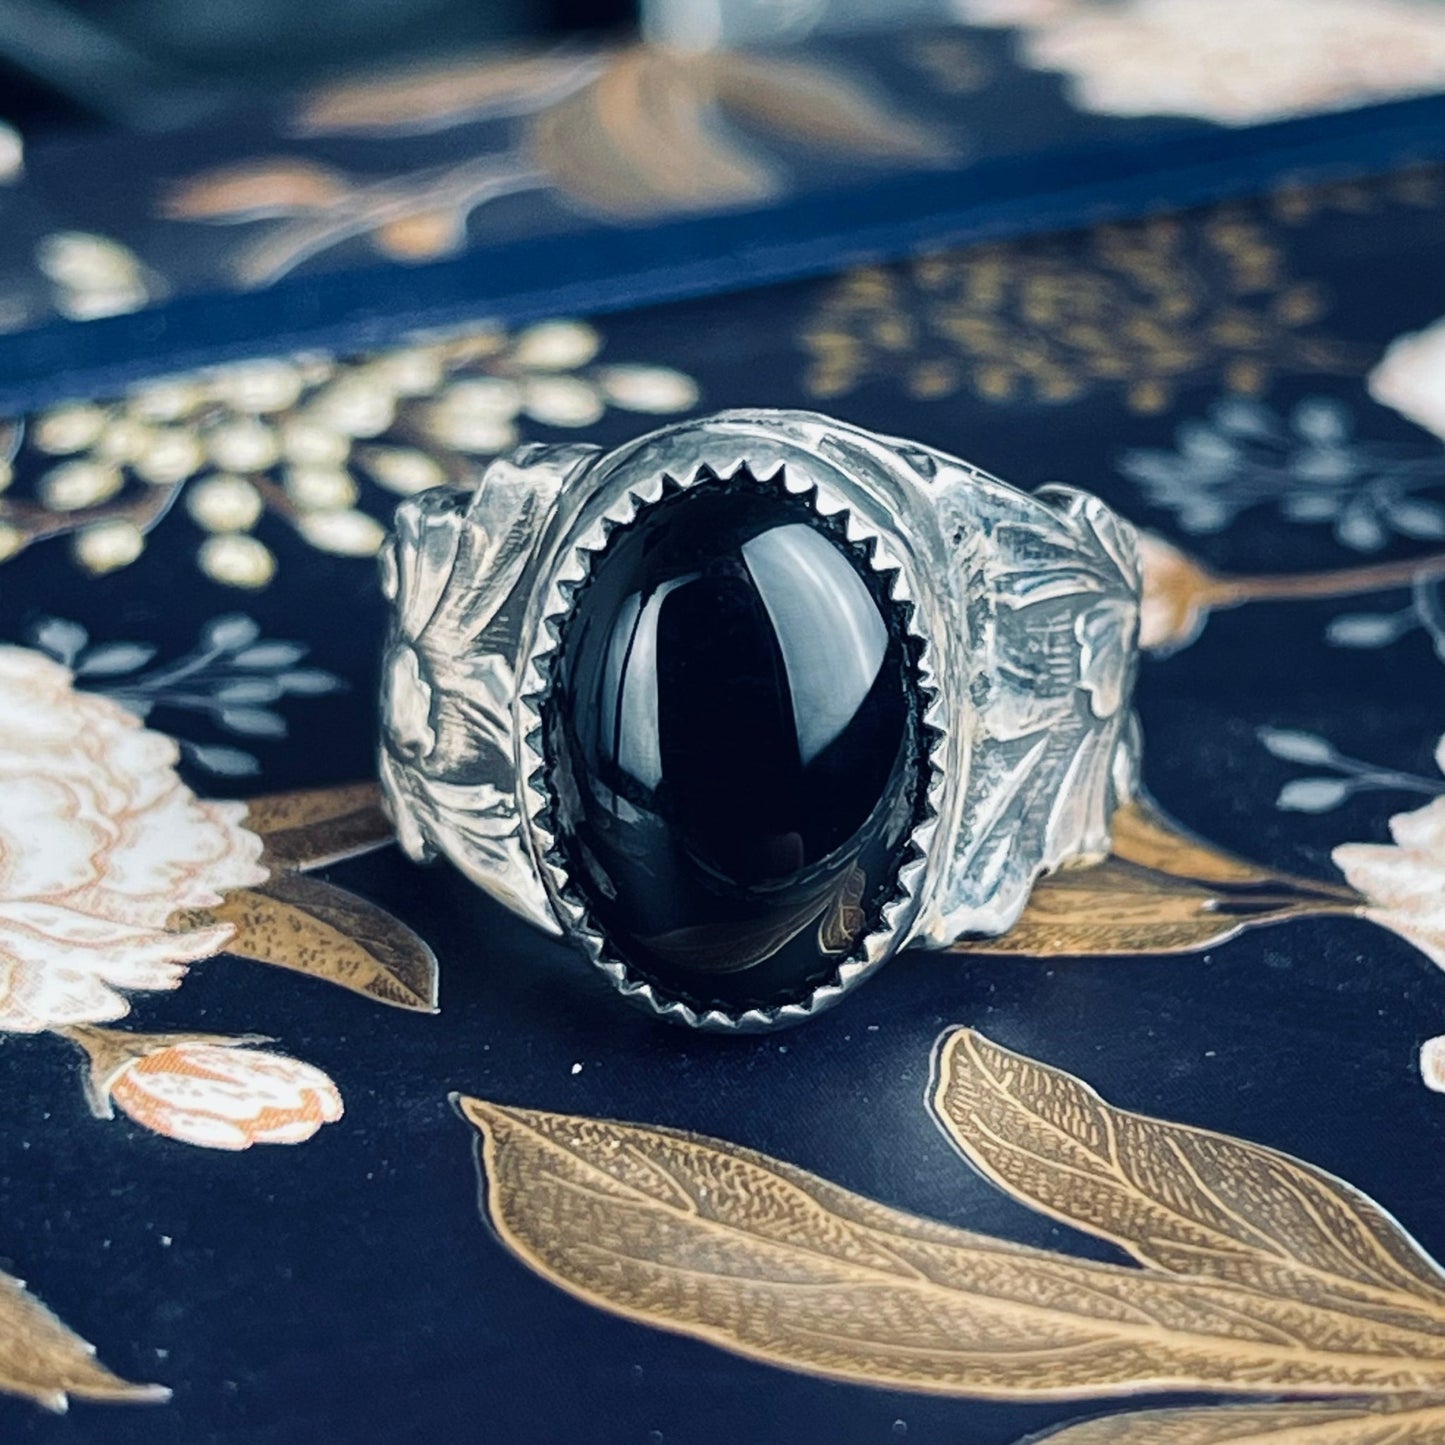 Victorian Filigree Leaves Band Onyx Sterling Ring { The Looming } - Loved To Death